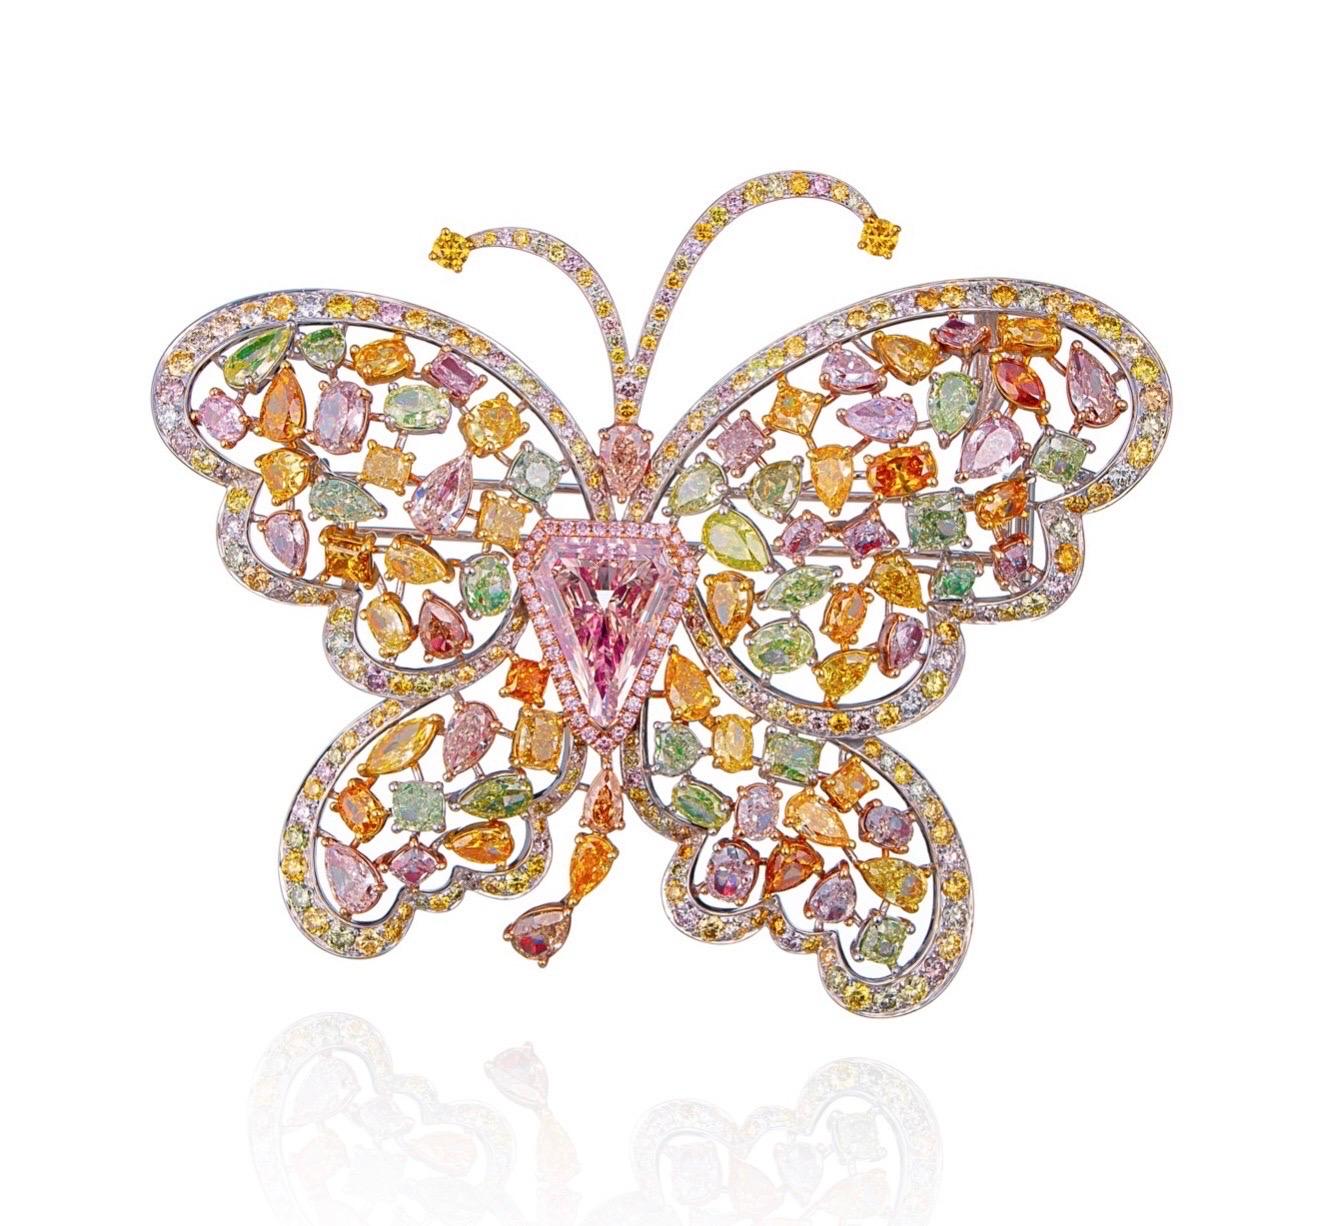 From The Museum Vault at Emilio Jewelry Located on New York's iconic Fifth Avenue,
Showcasing a very special and rare butterfly brooch hand made by Emilio Artisans, specializing in bringing out the maximum potential of each and every natural fancy